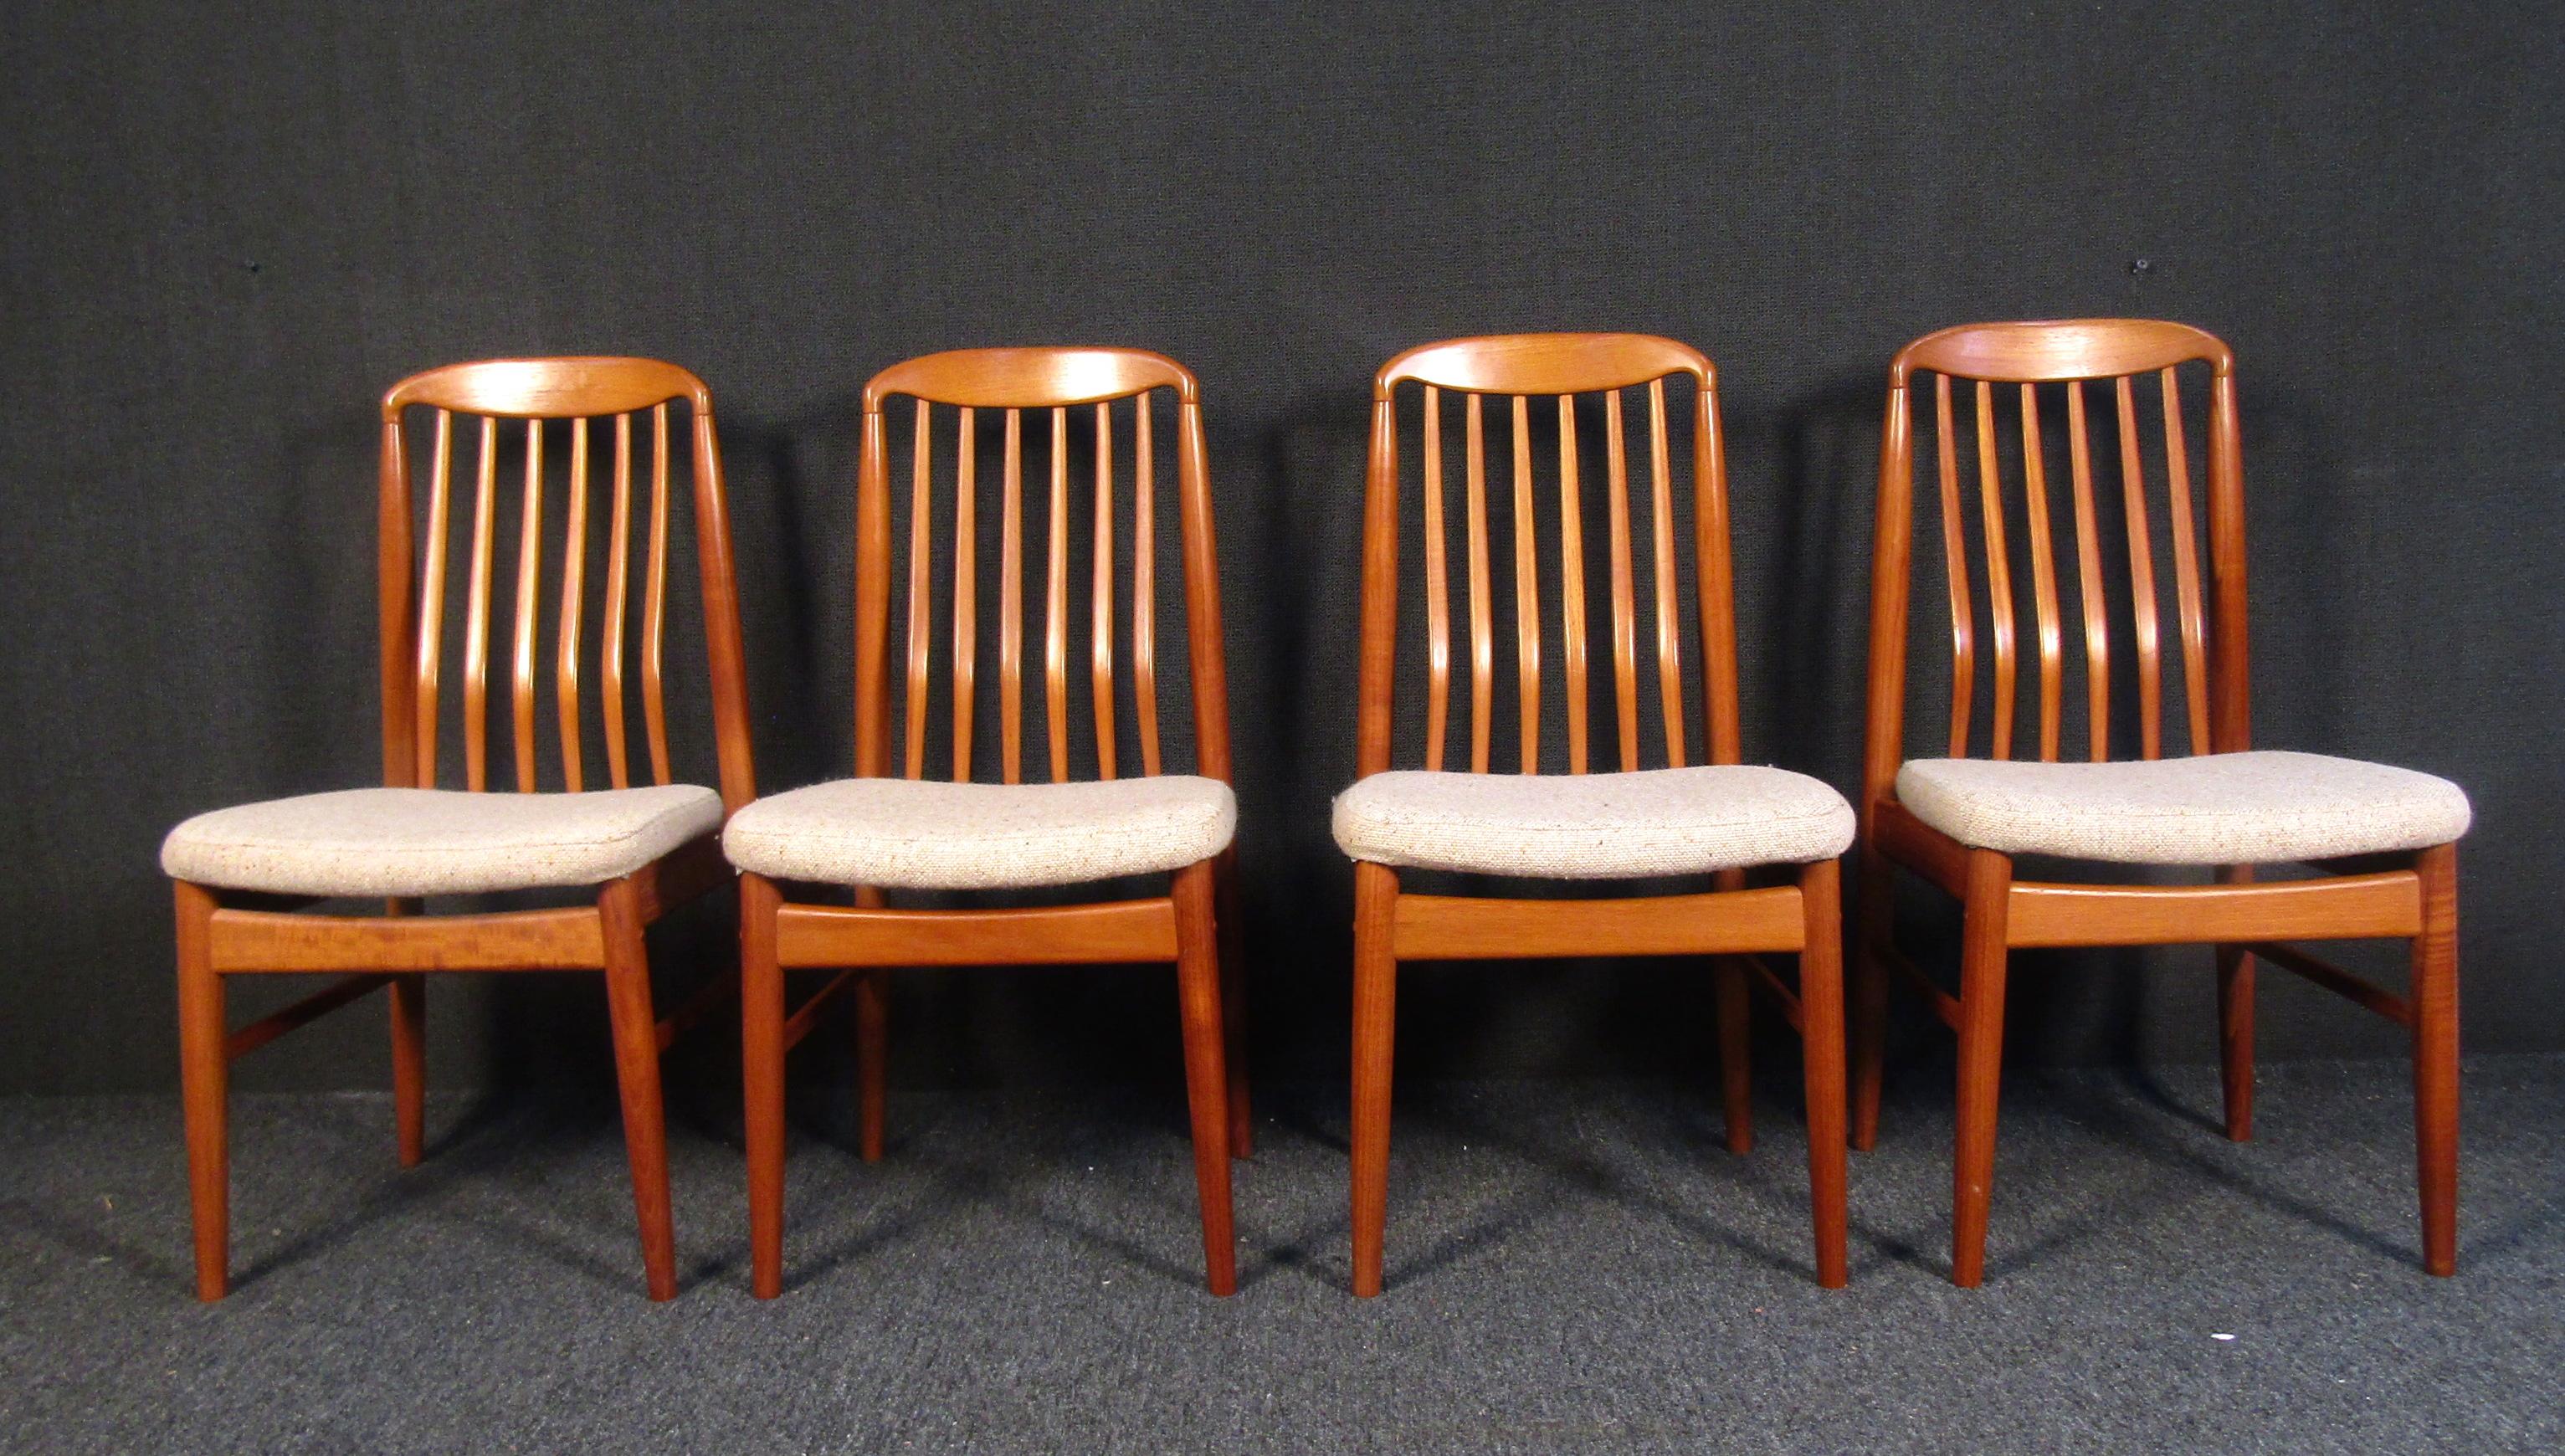 Gorgeous teak dining chairs sturdily constructed with handsome joinery showcased on the frames, covered in a vintage beige upholstery. Sure to make a great addition to any modern interior. 

Please confirm item location with dealer (NJ or NY).